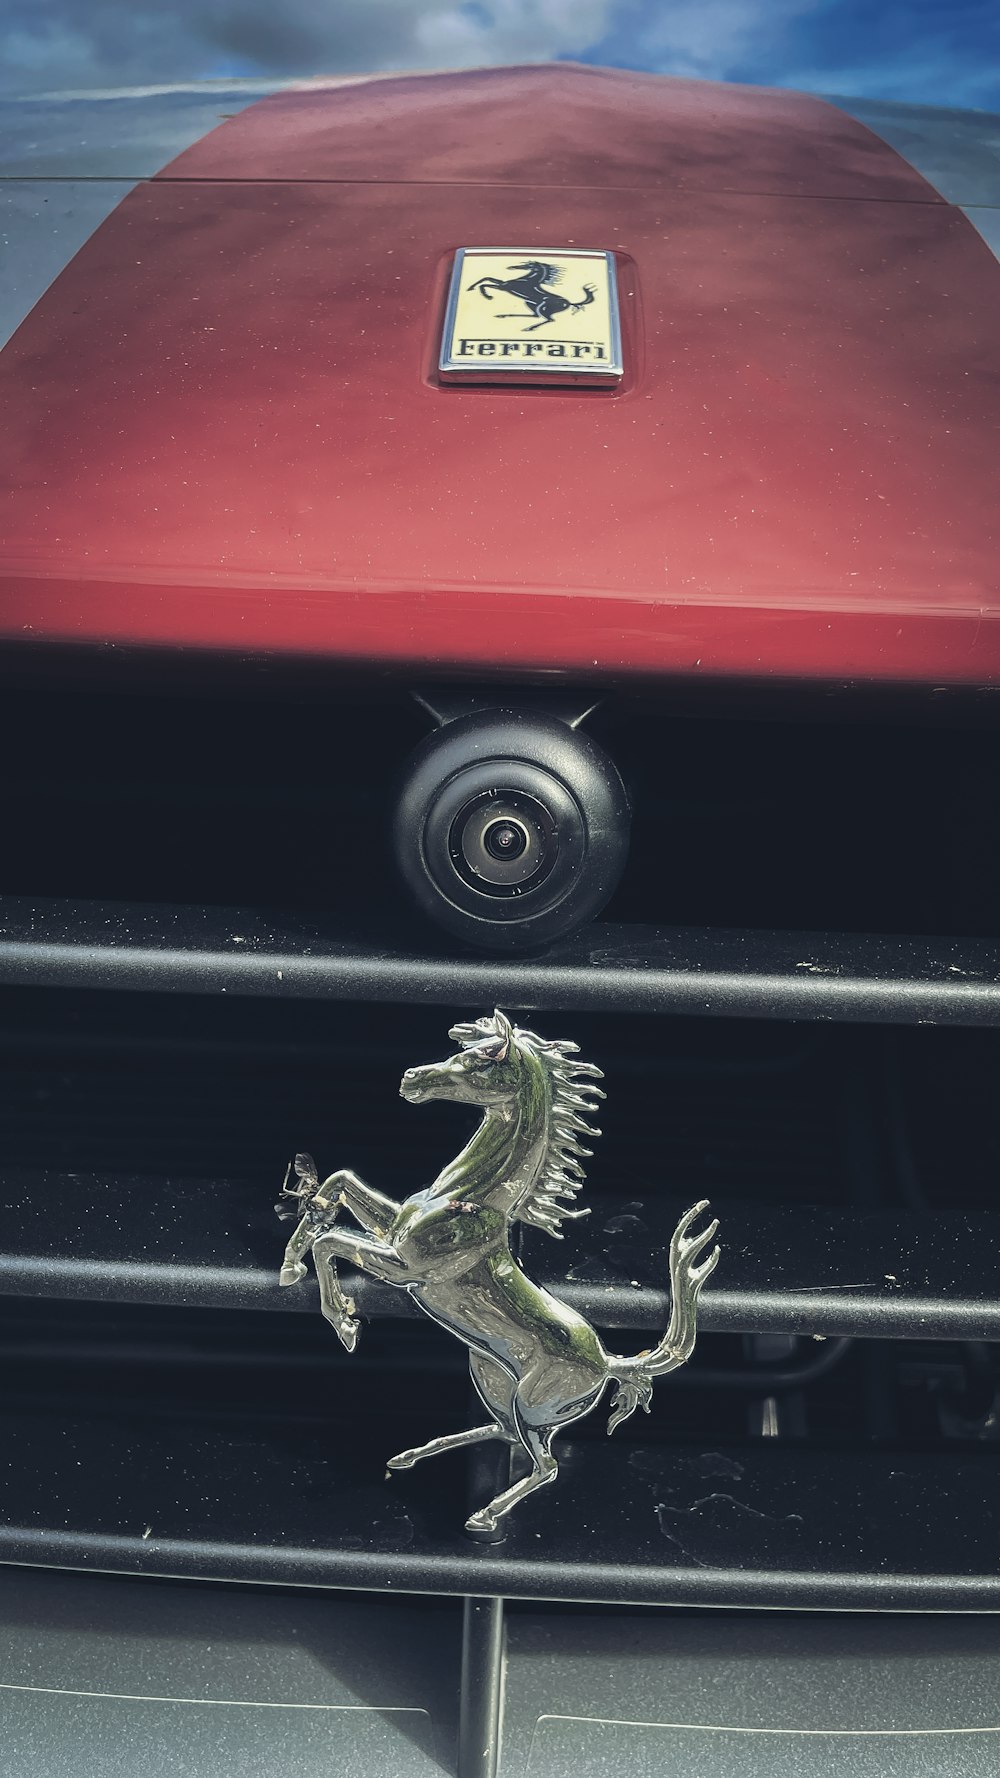 a close up of a car's grille with a horse on it